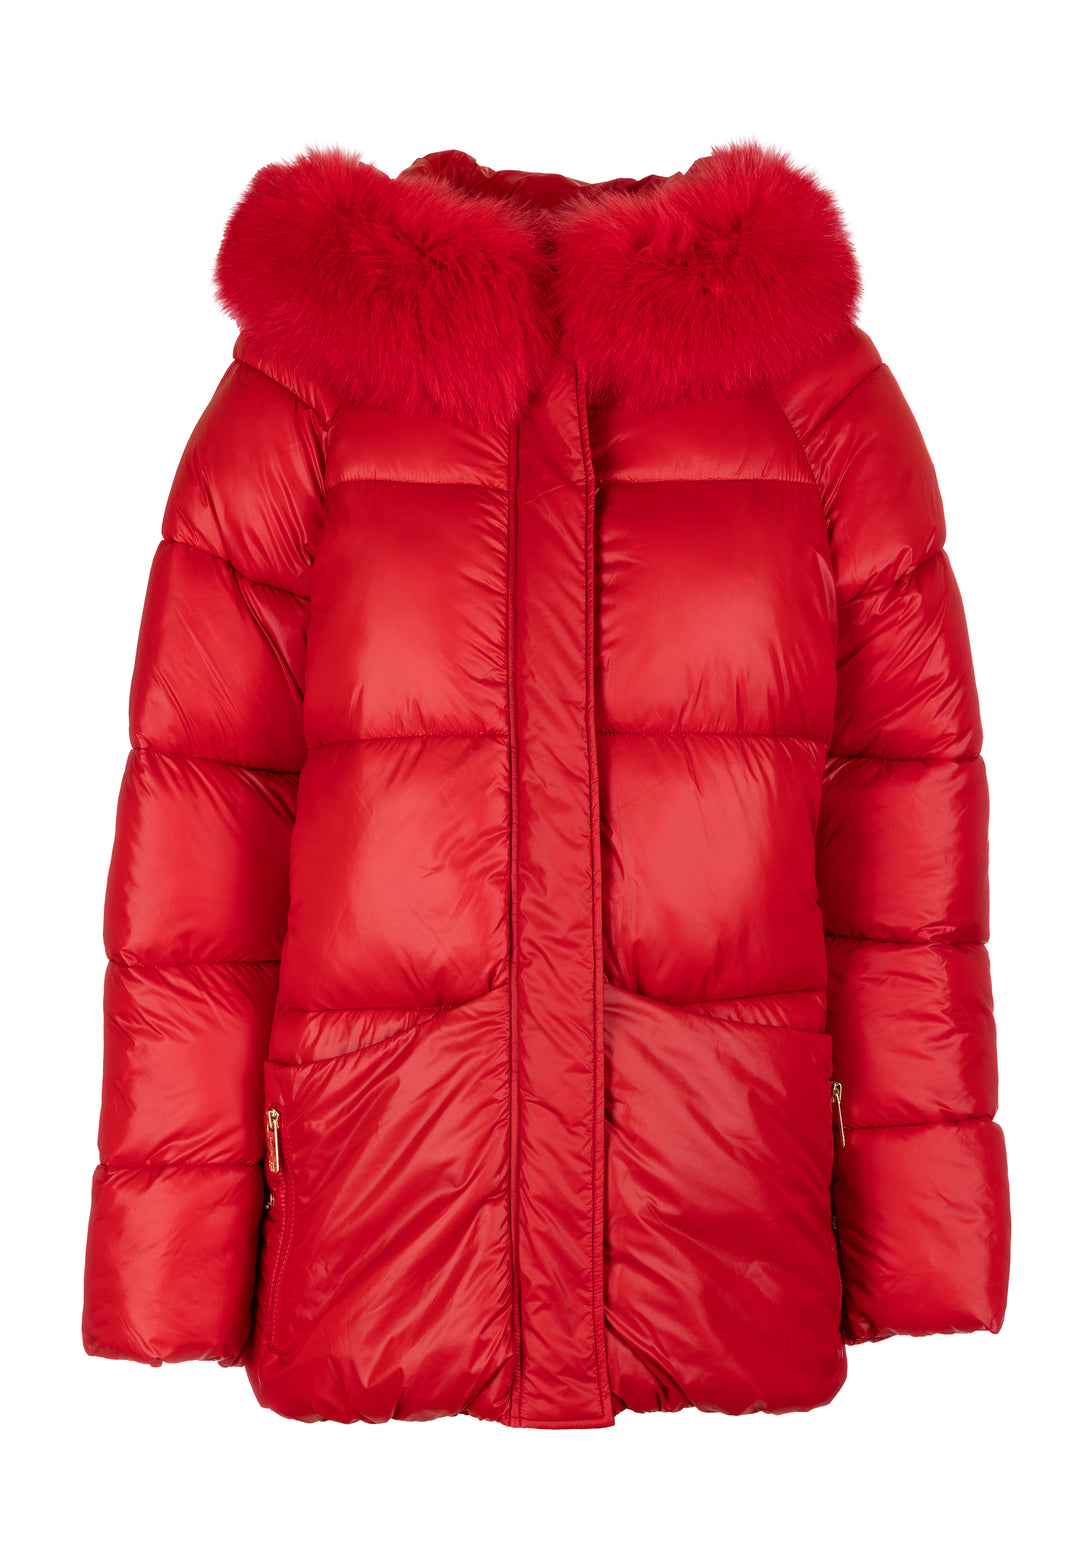 Padded jacket regular fit with real fur neck